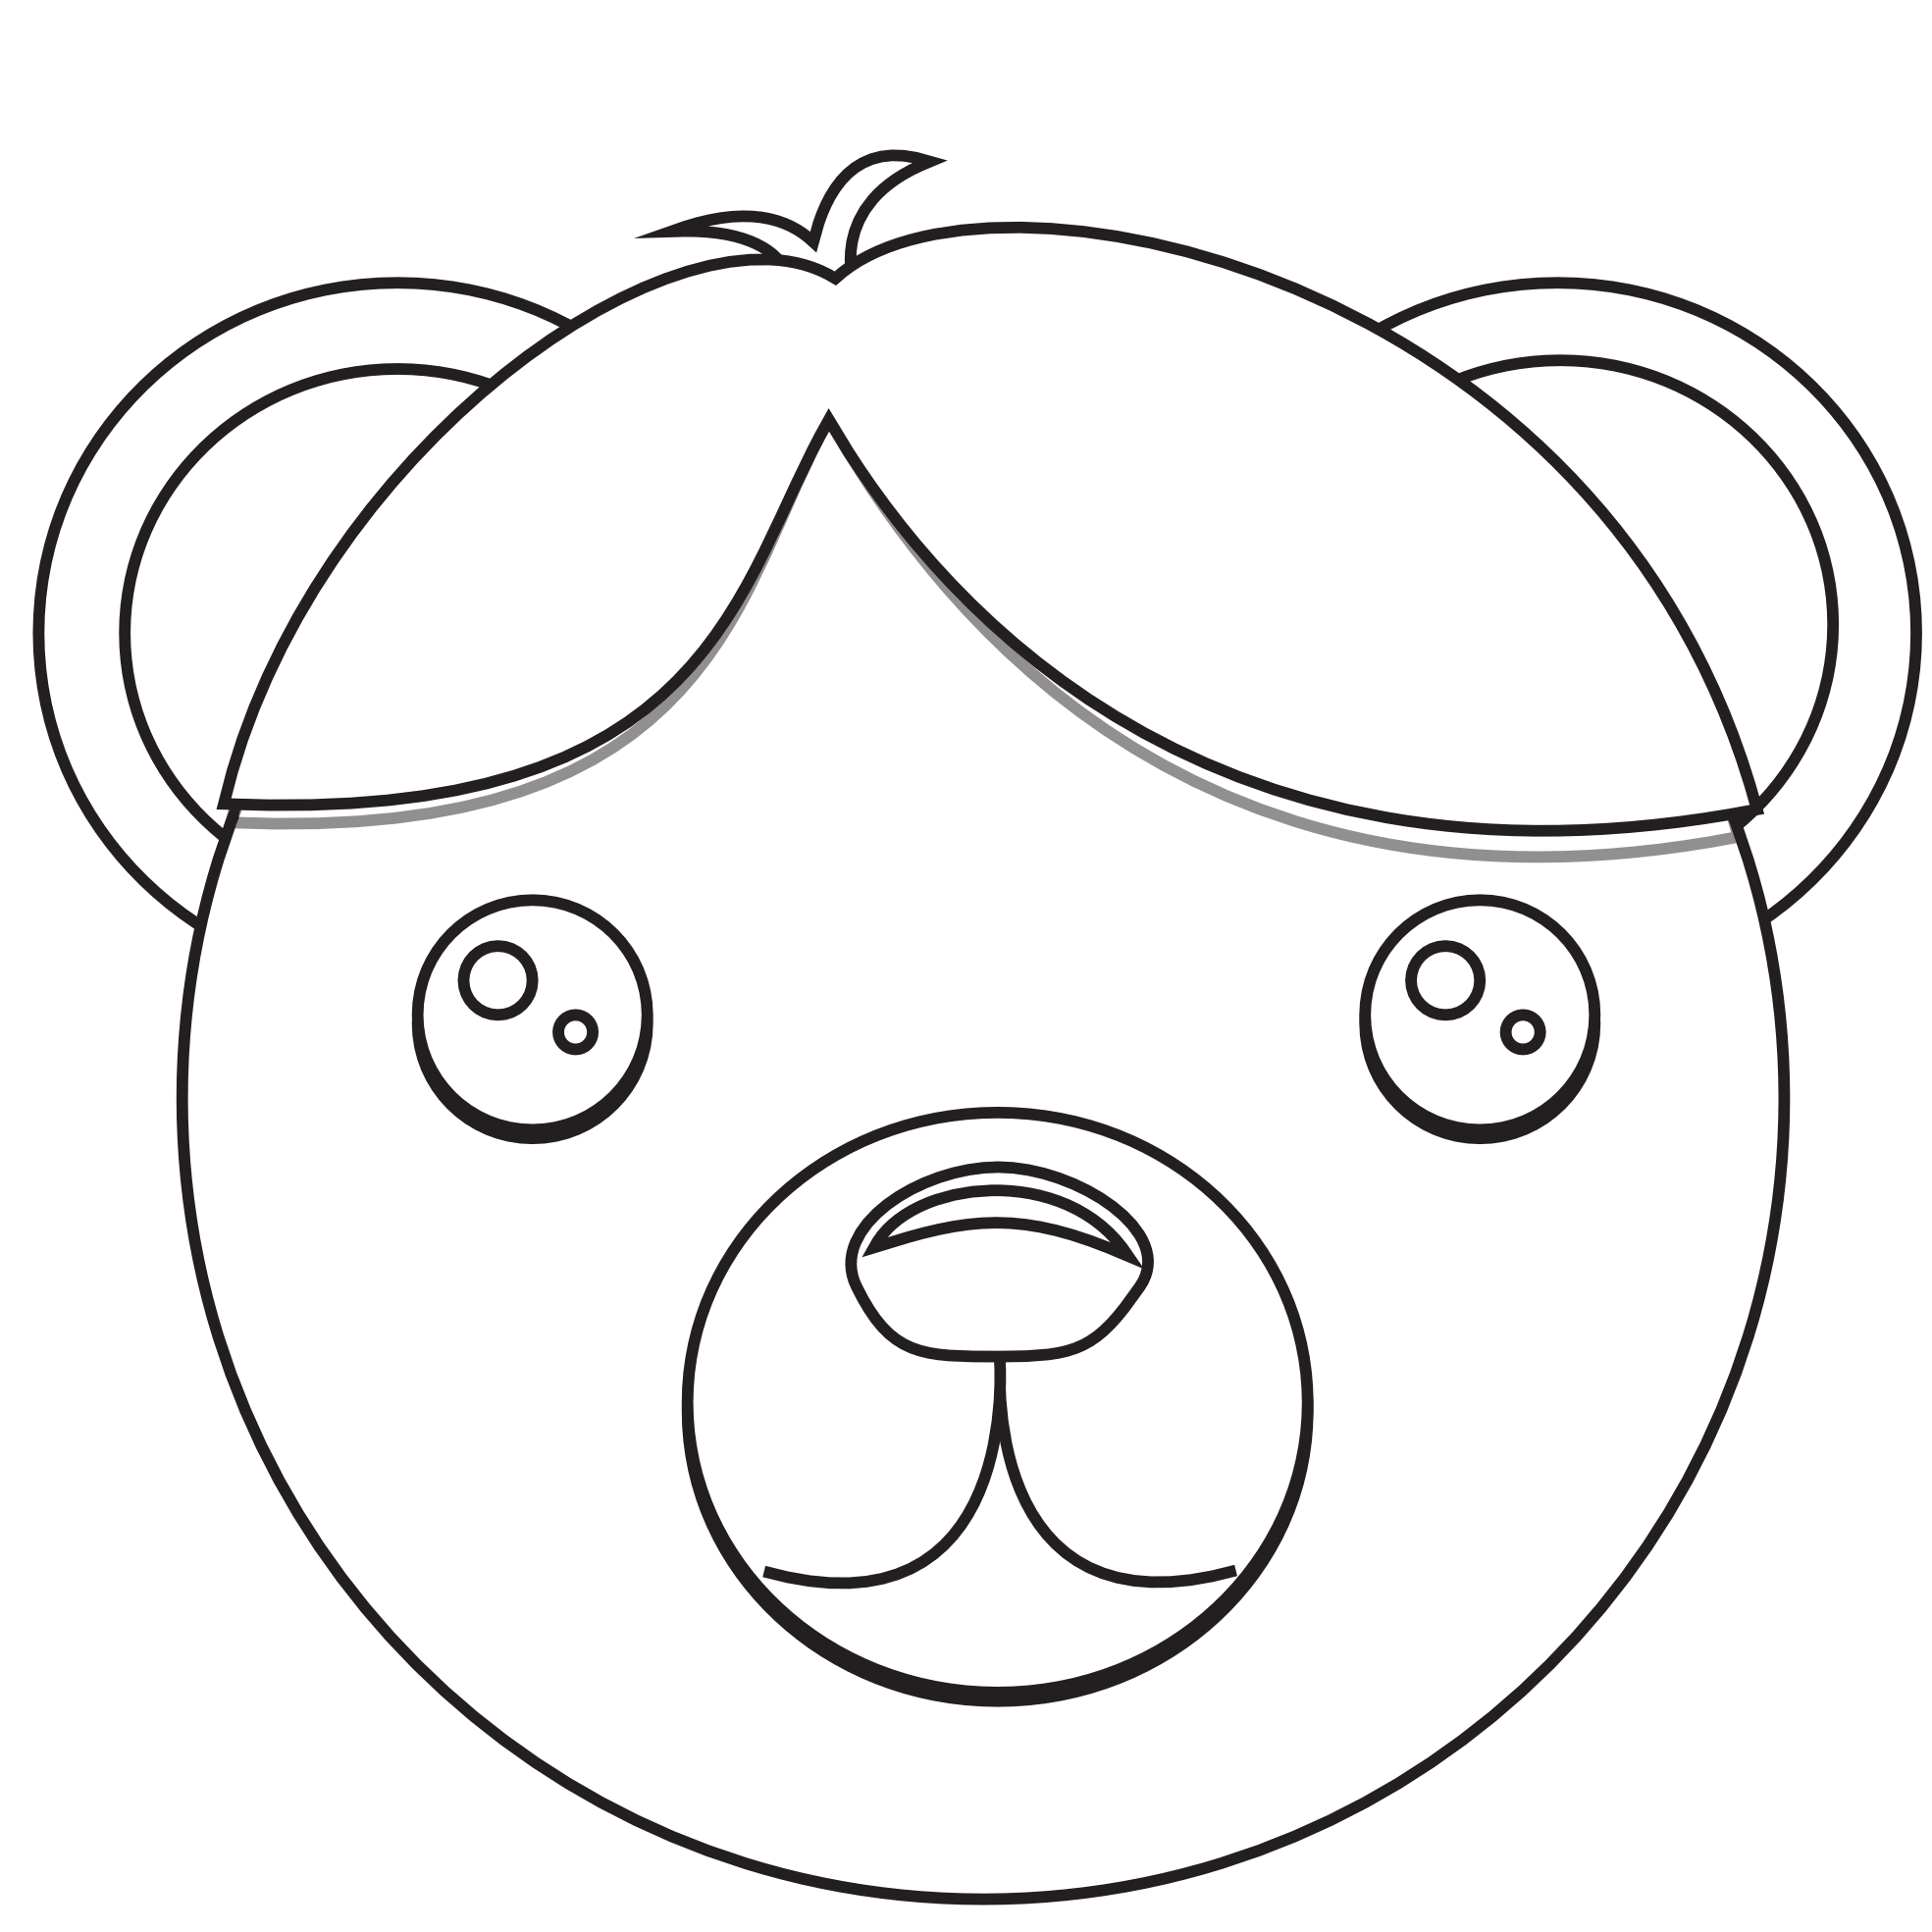 Blue Bear Black White Line Art Coloring Book Colouring Coloring